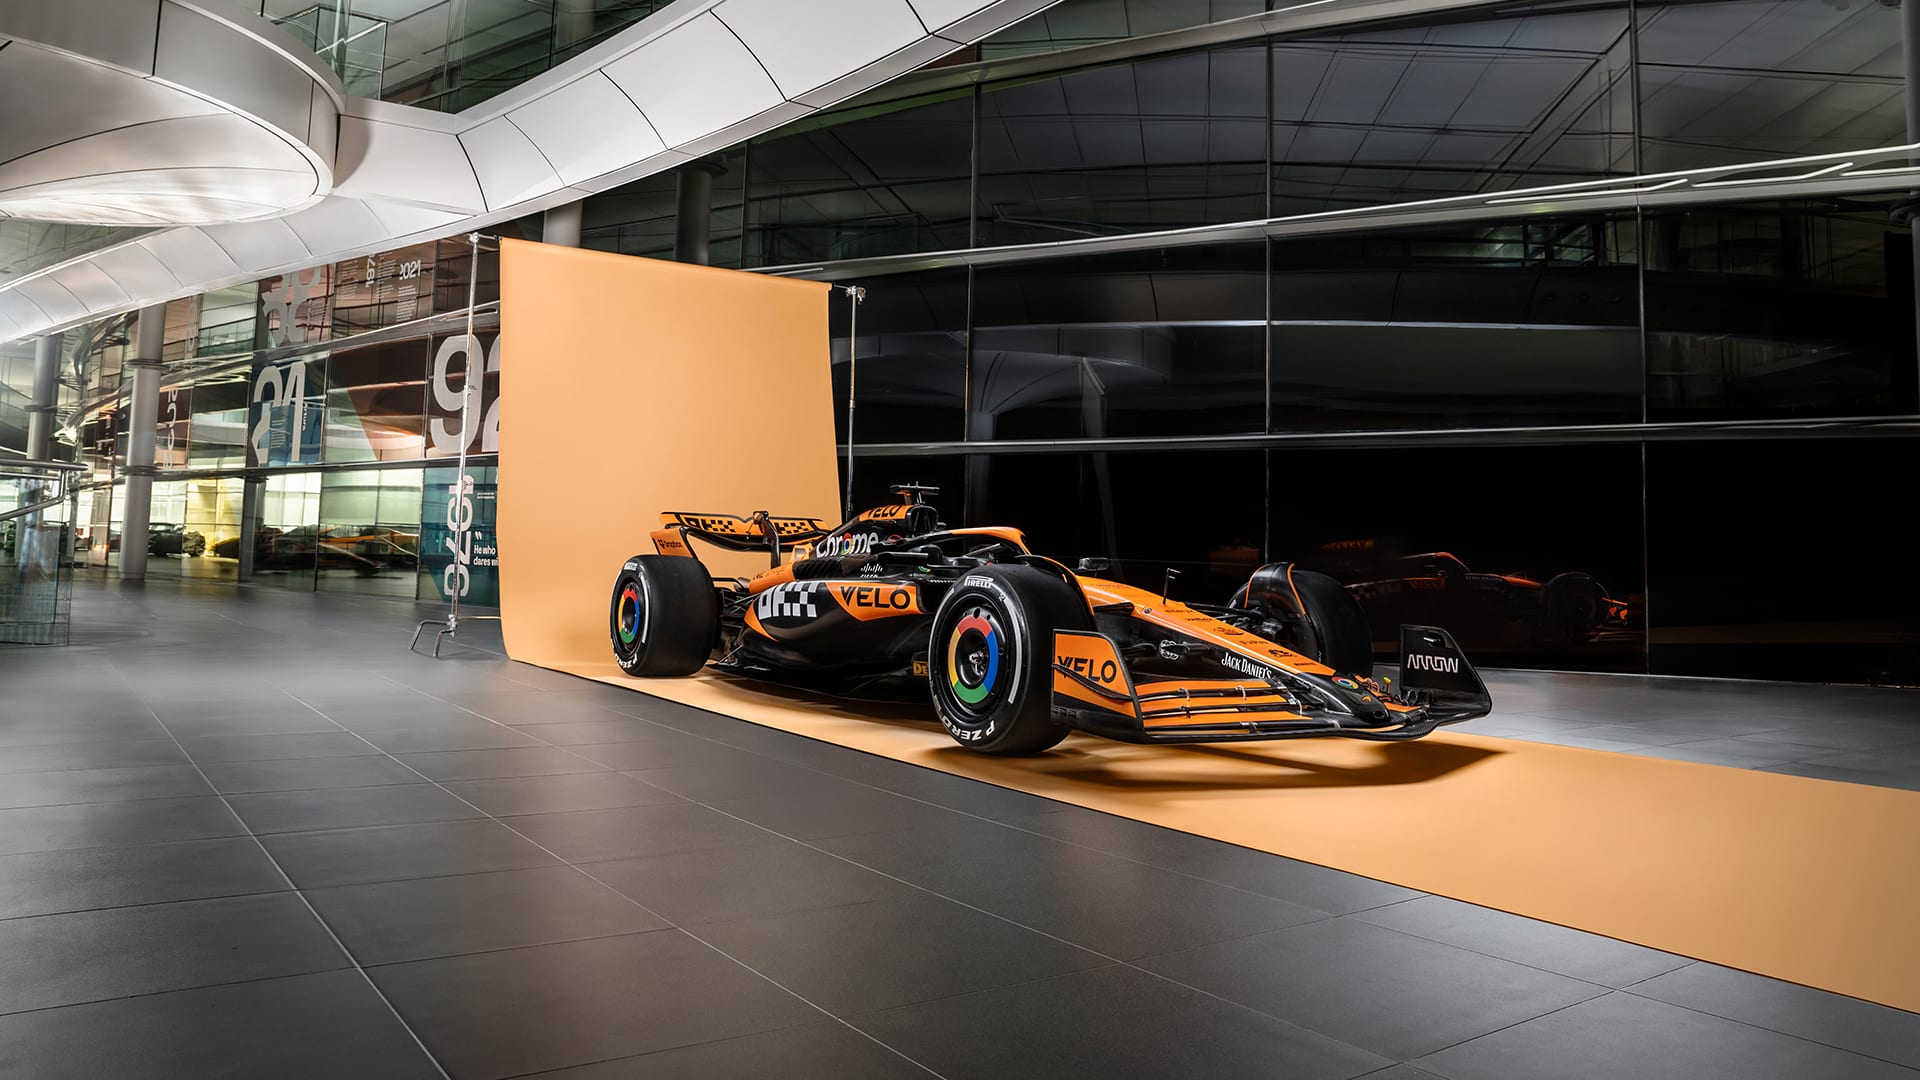 2024 McLaren MCL38 car reveal gallery: Check out more angles of the new  McLaren MCL38 challenger